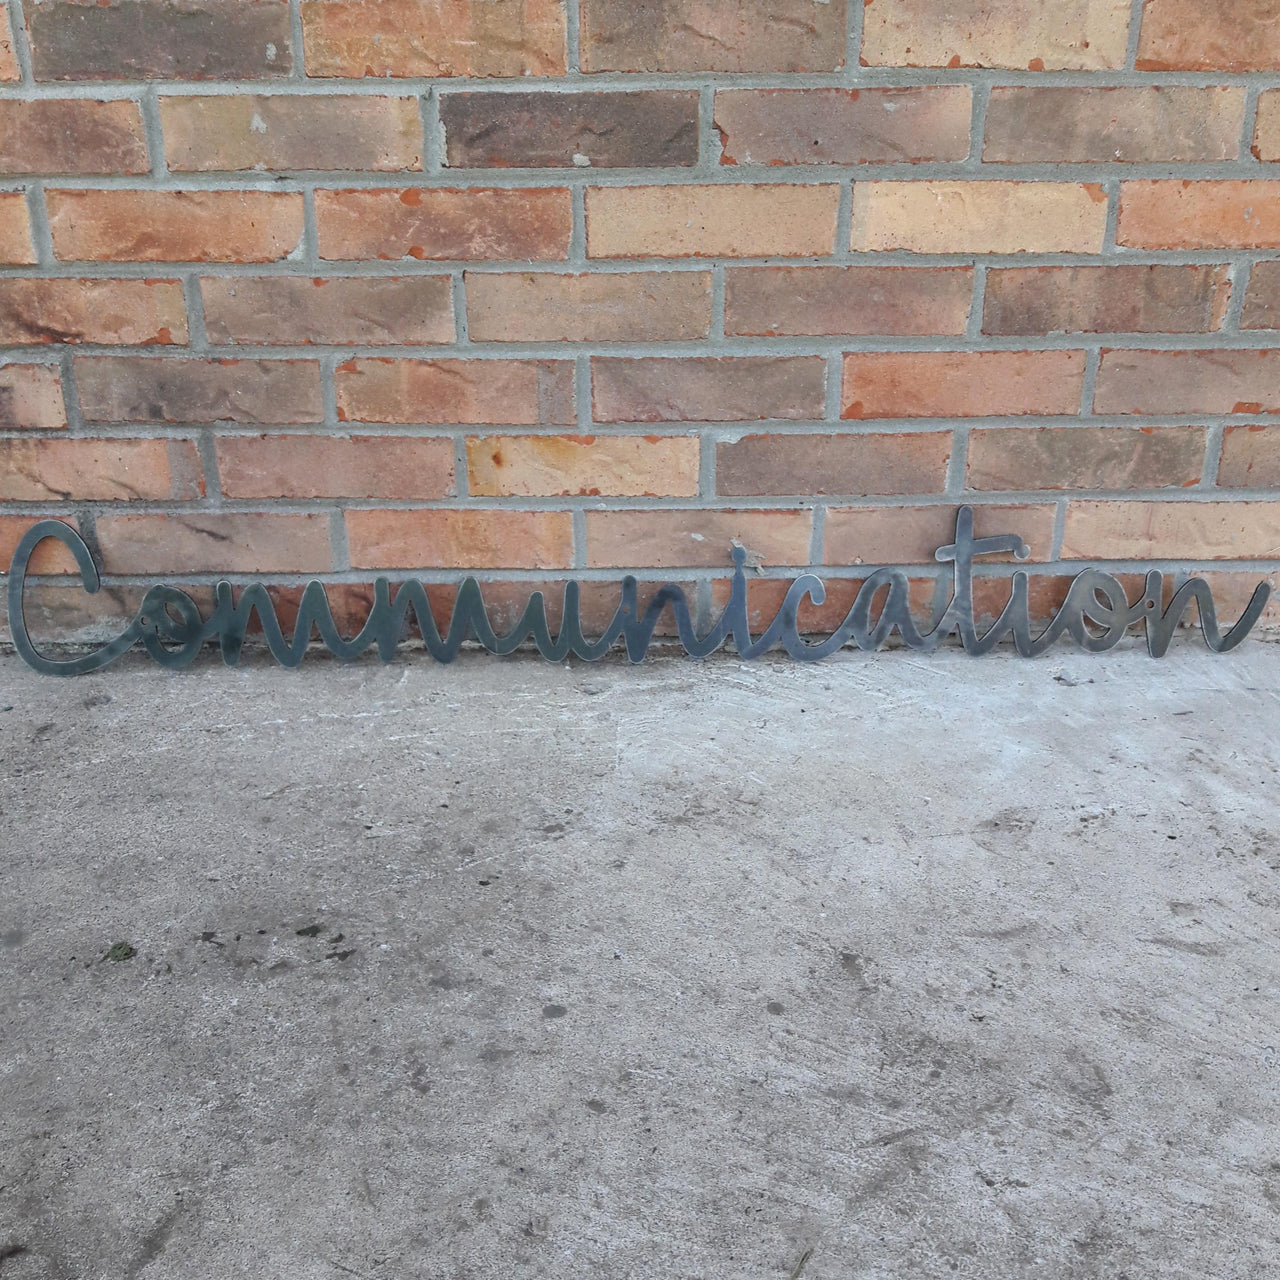 This custom metal sign is a cursive word and reads, "Communication"